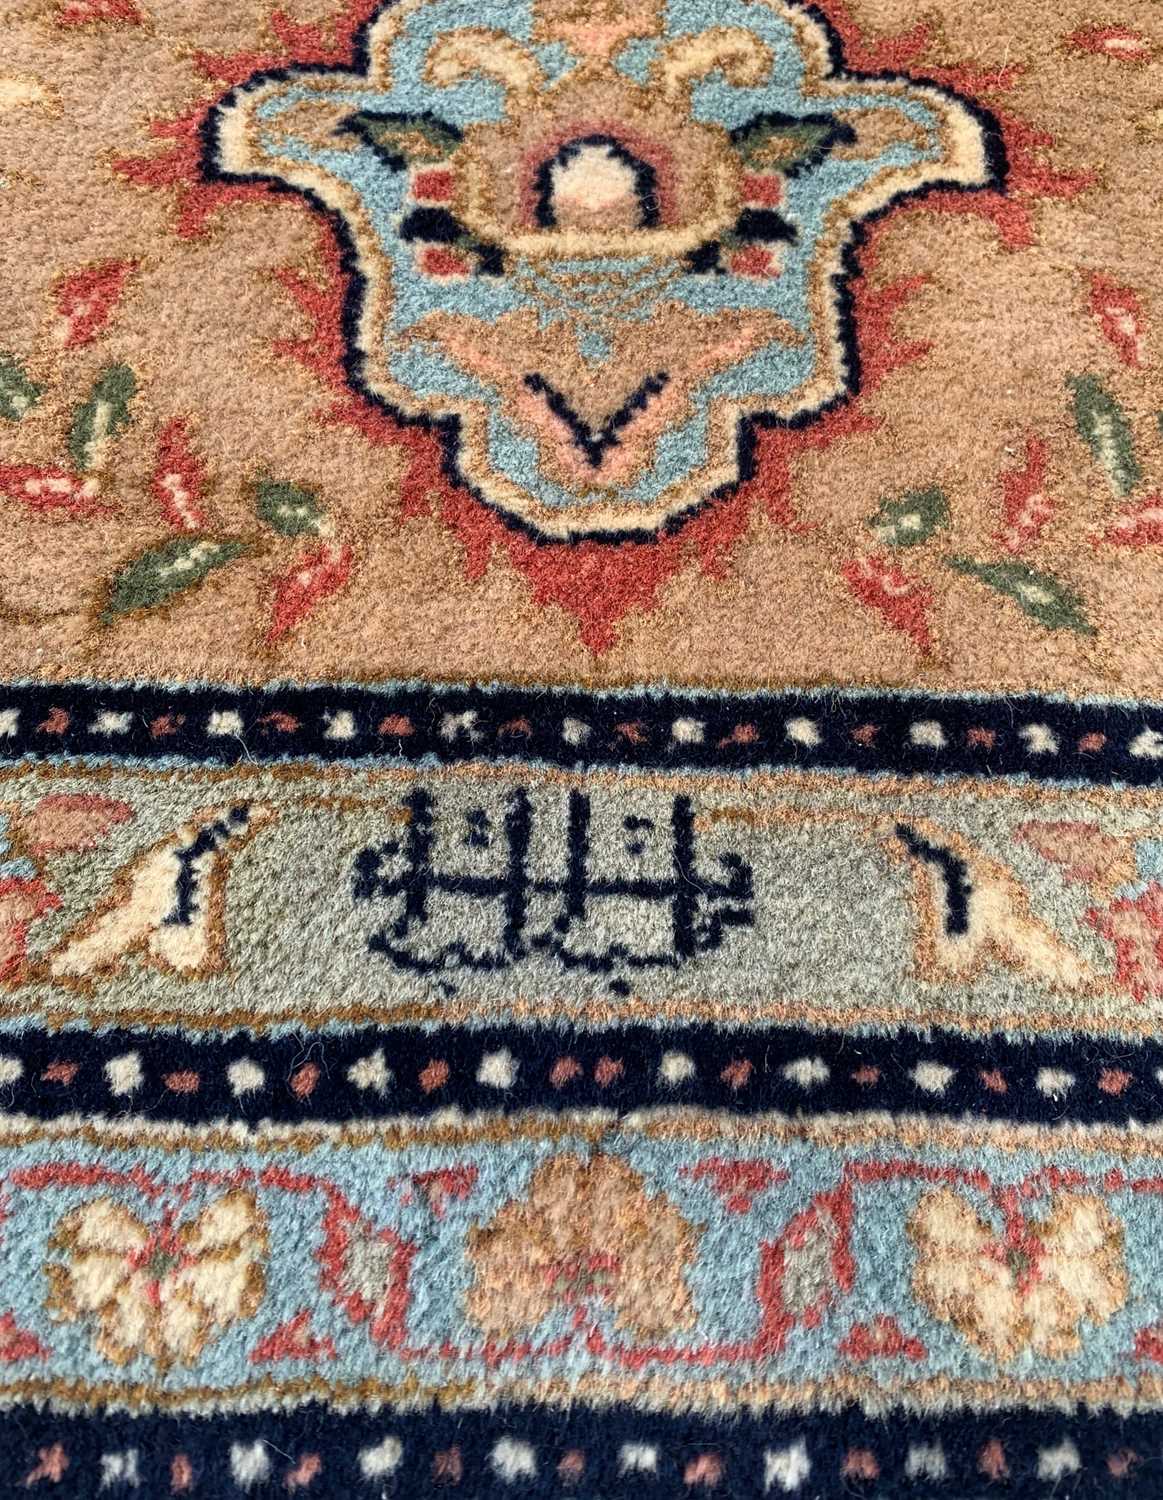 MODERN ORIENTAL CARPET, red central medallion with mosque lamps, on a dark field with floral ivory - Image 3 of 7